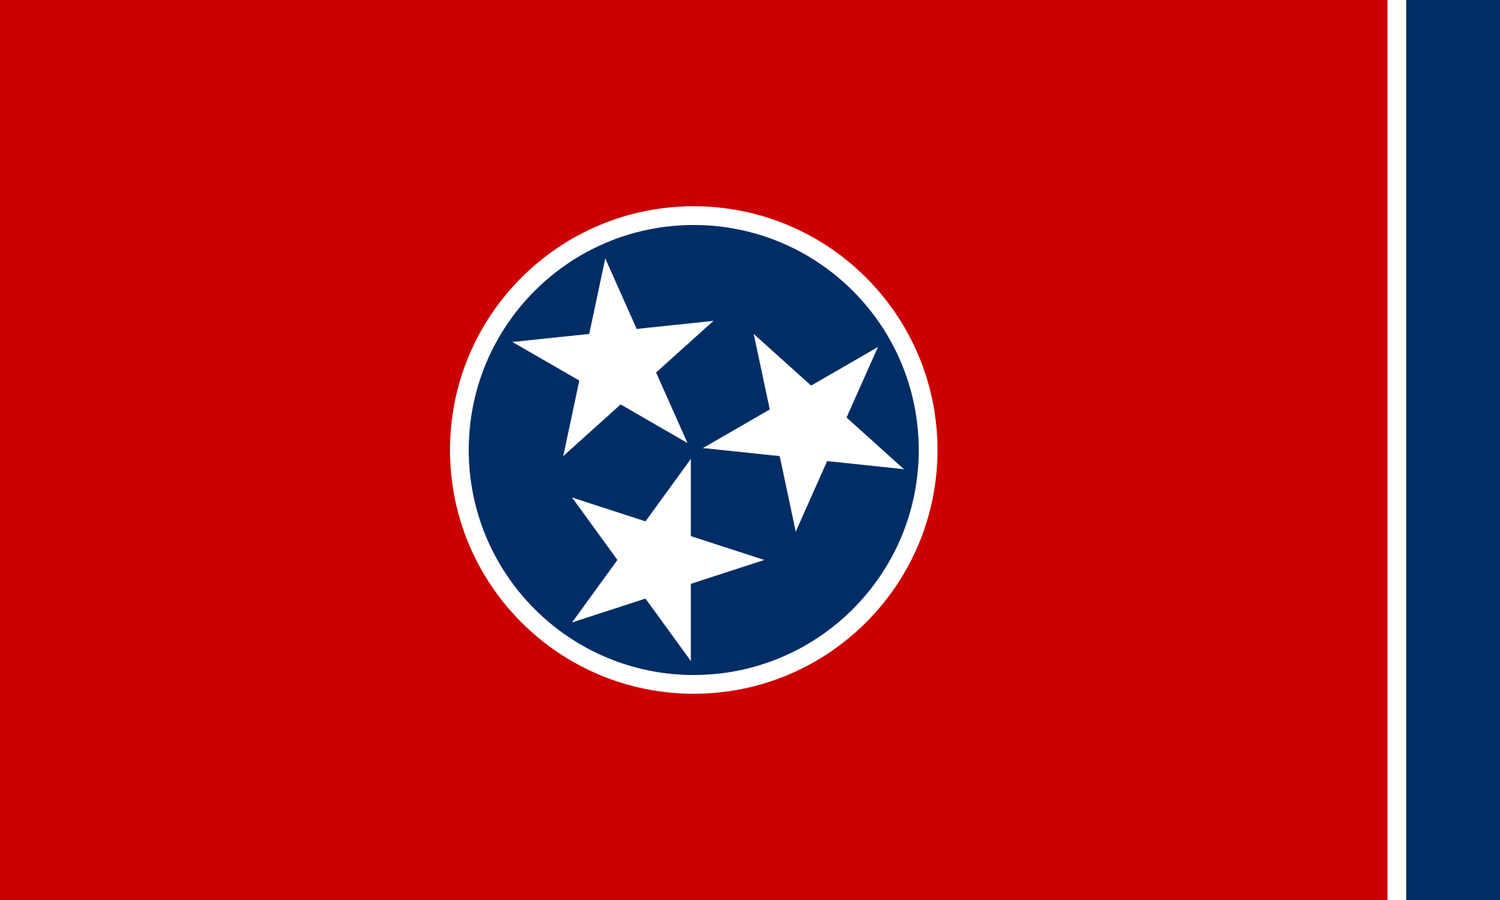 The official state flag of Tennessee was adopted in 1905 and showcases a blue circle with three white five-pointed stars on a rectangular field of red. - History By Mail